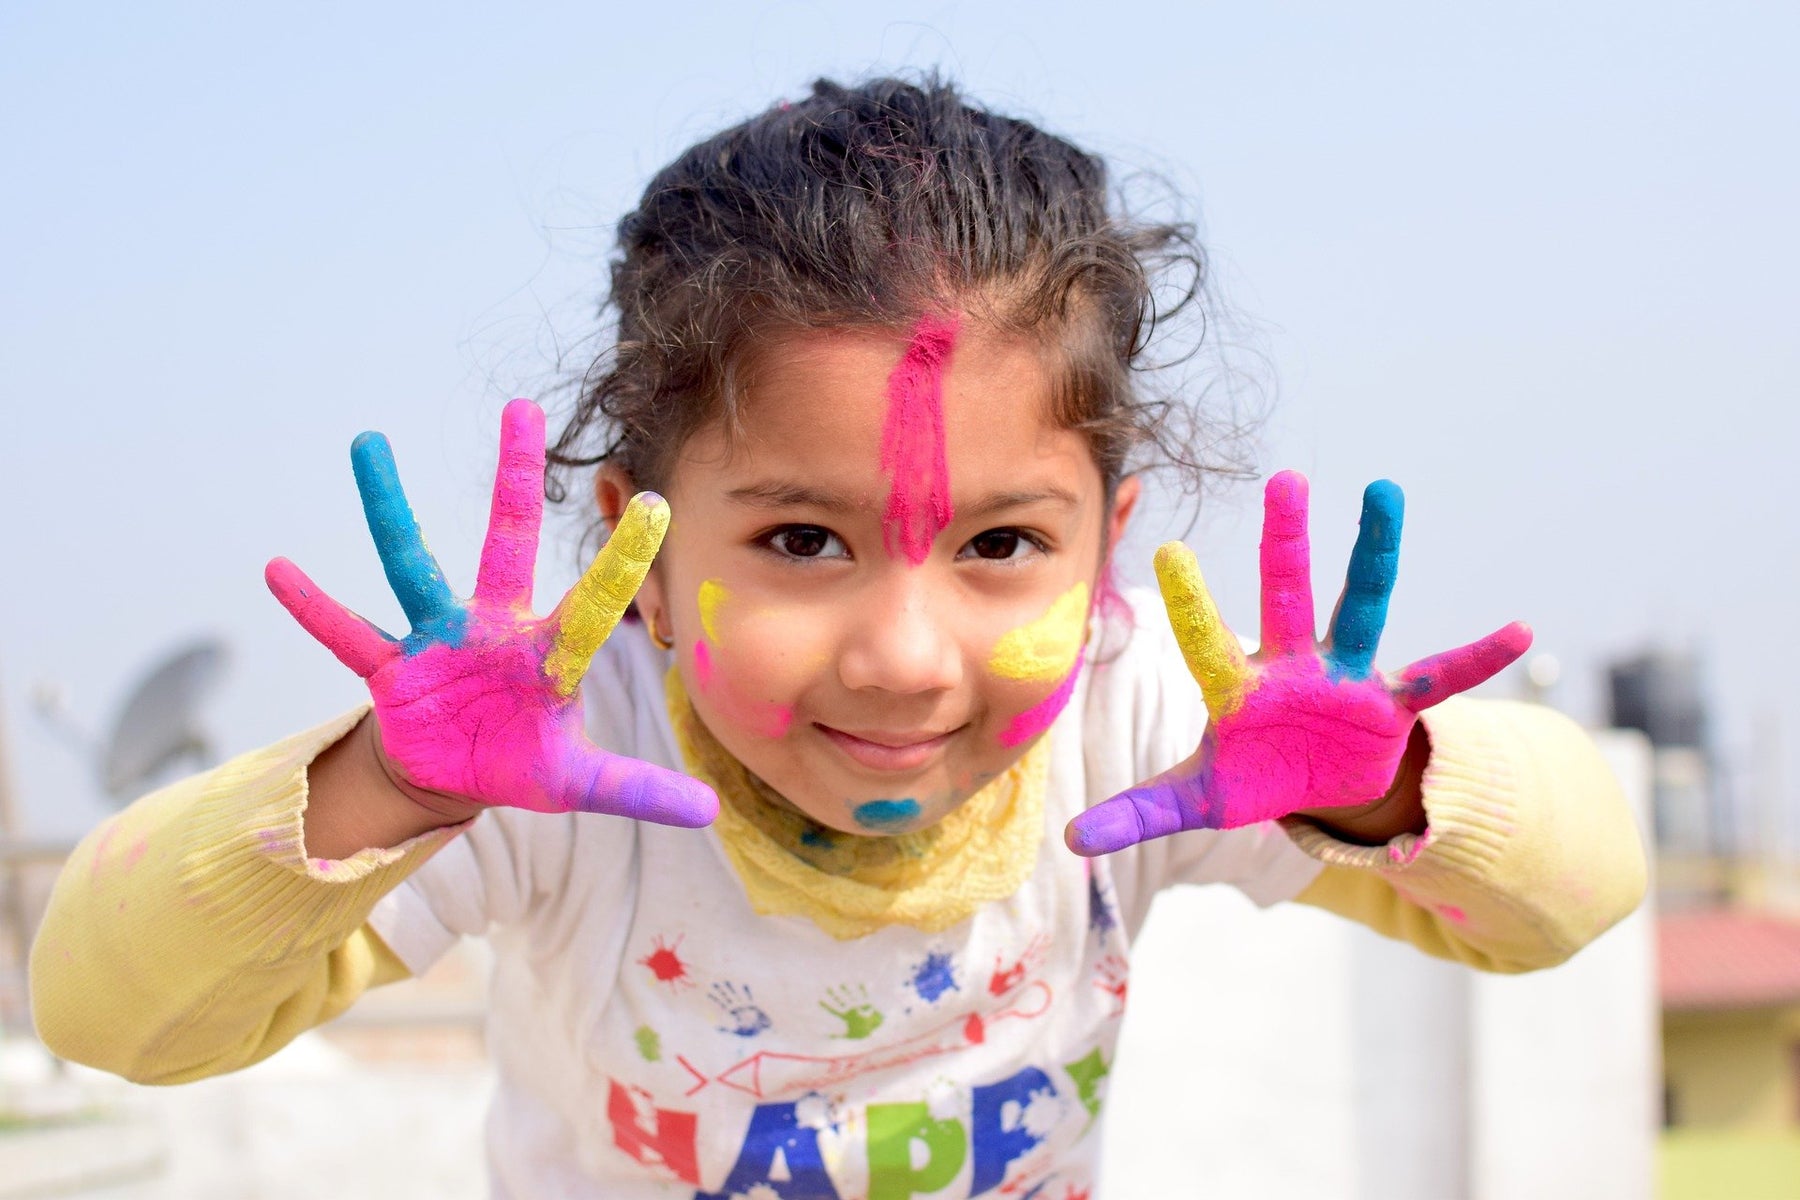 Smiling girl with hands full of colors